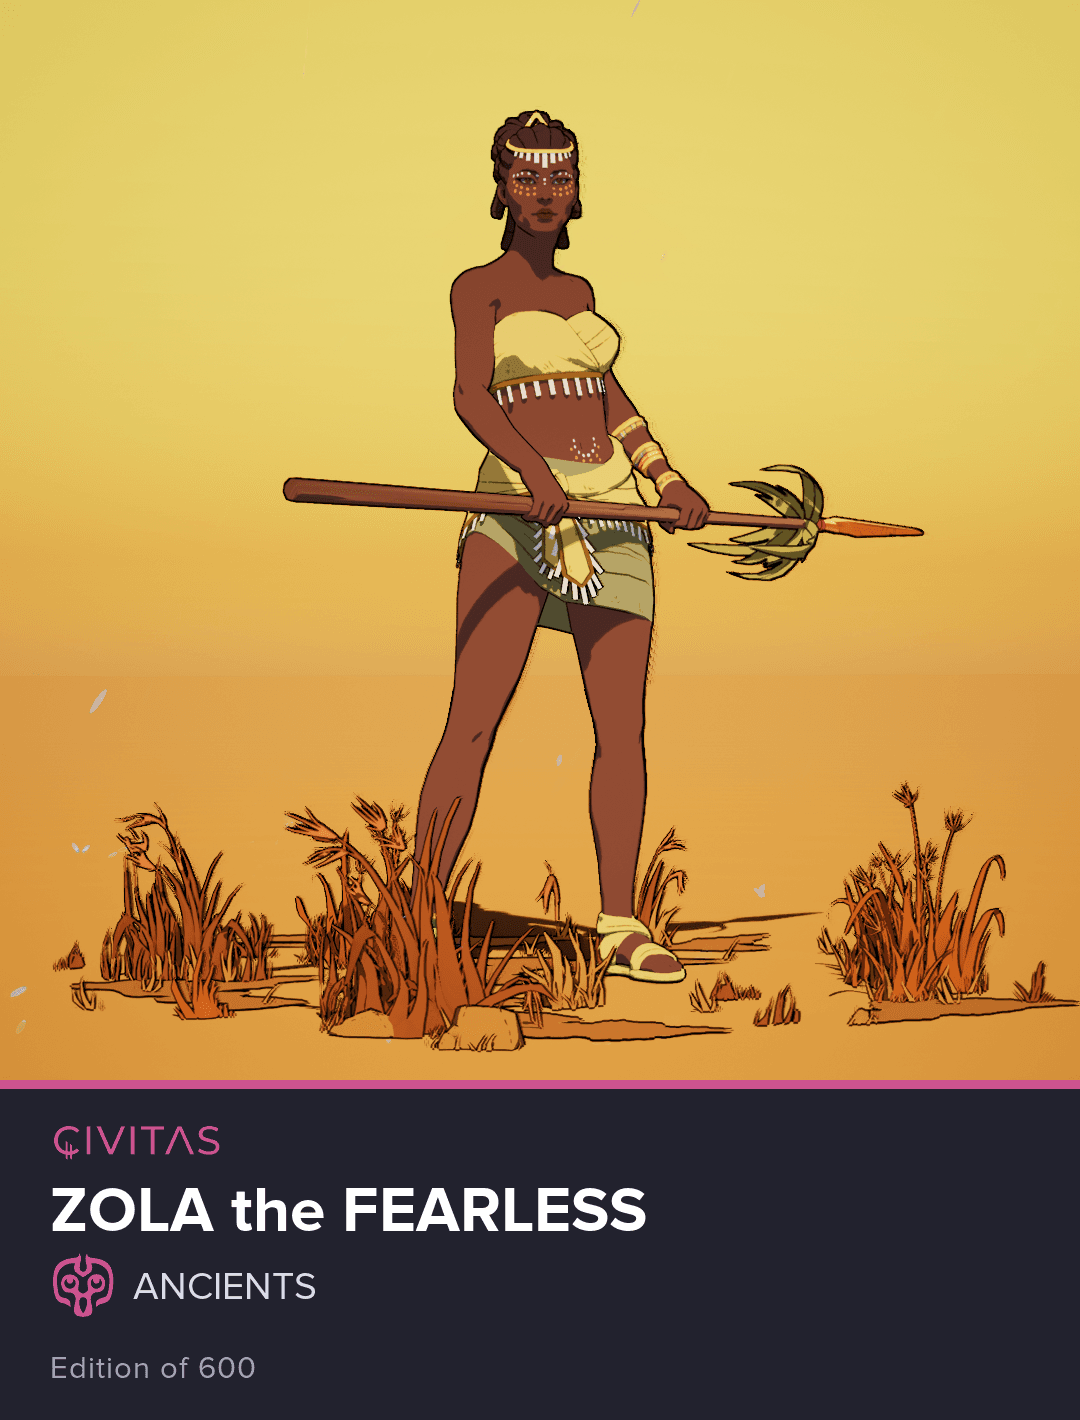 Zola the Fearless #389